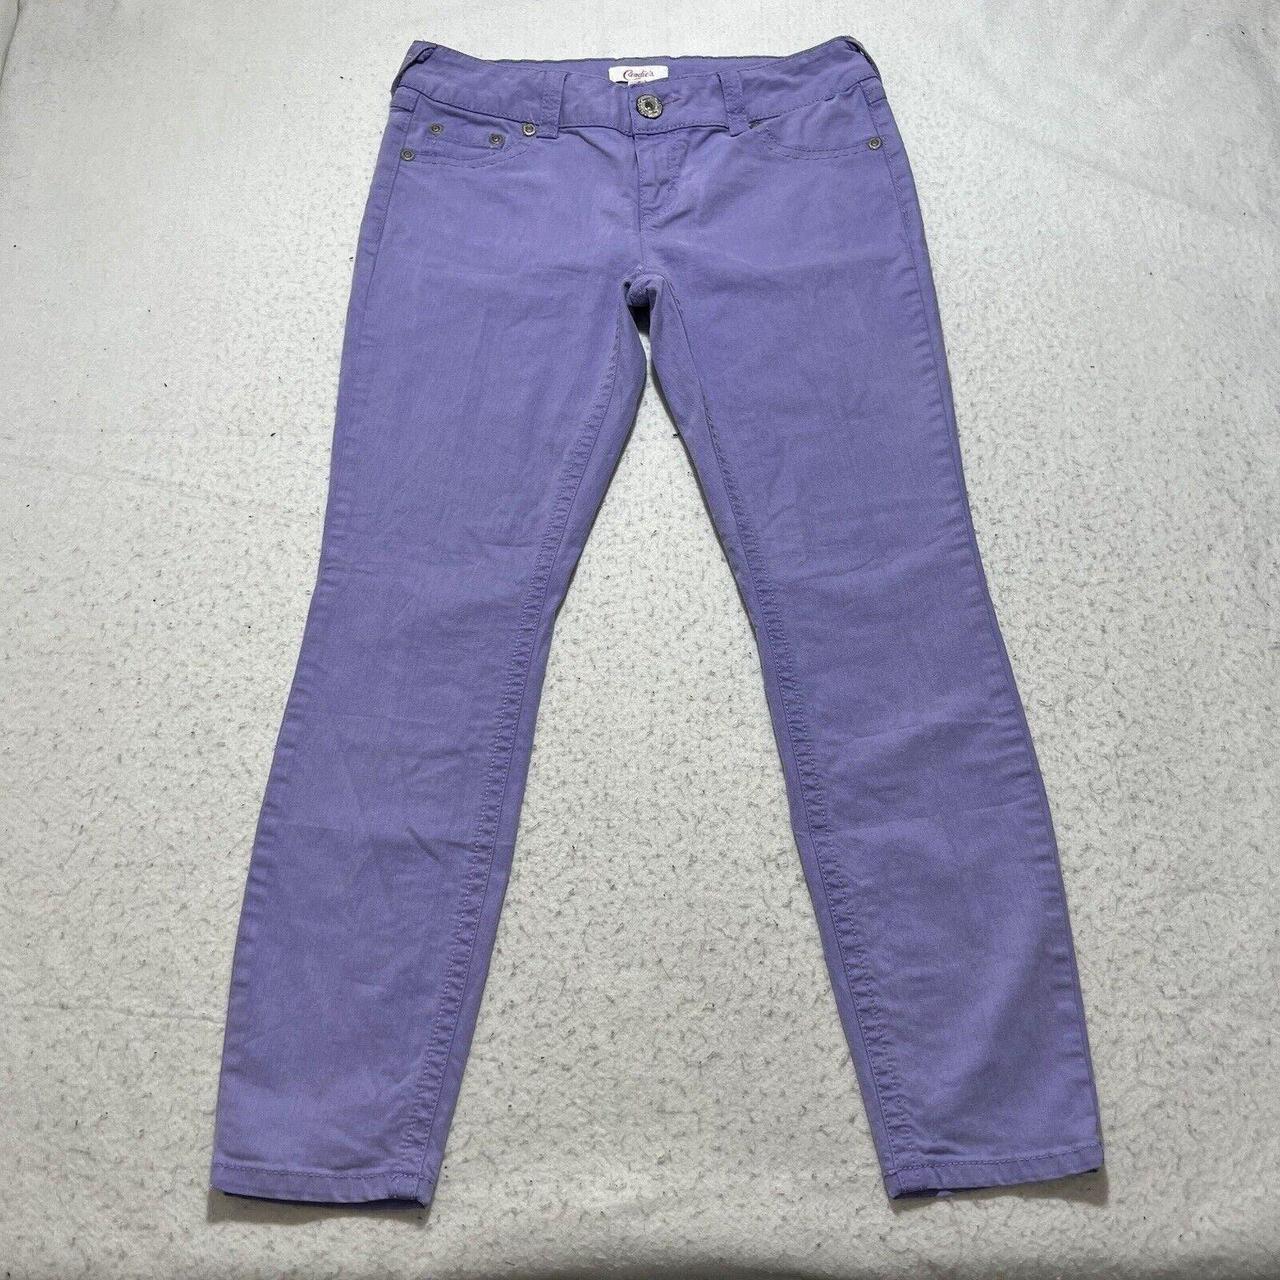 Great condition Candie's skinny low rise denim jeans - Depop